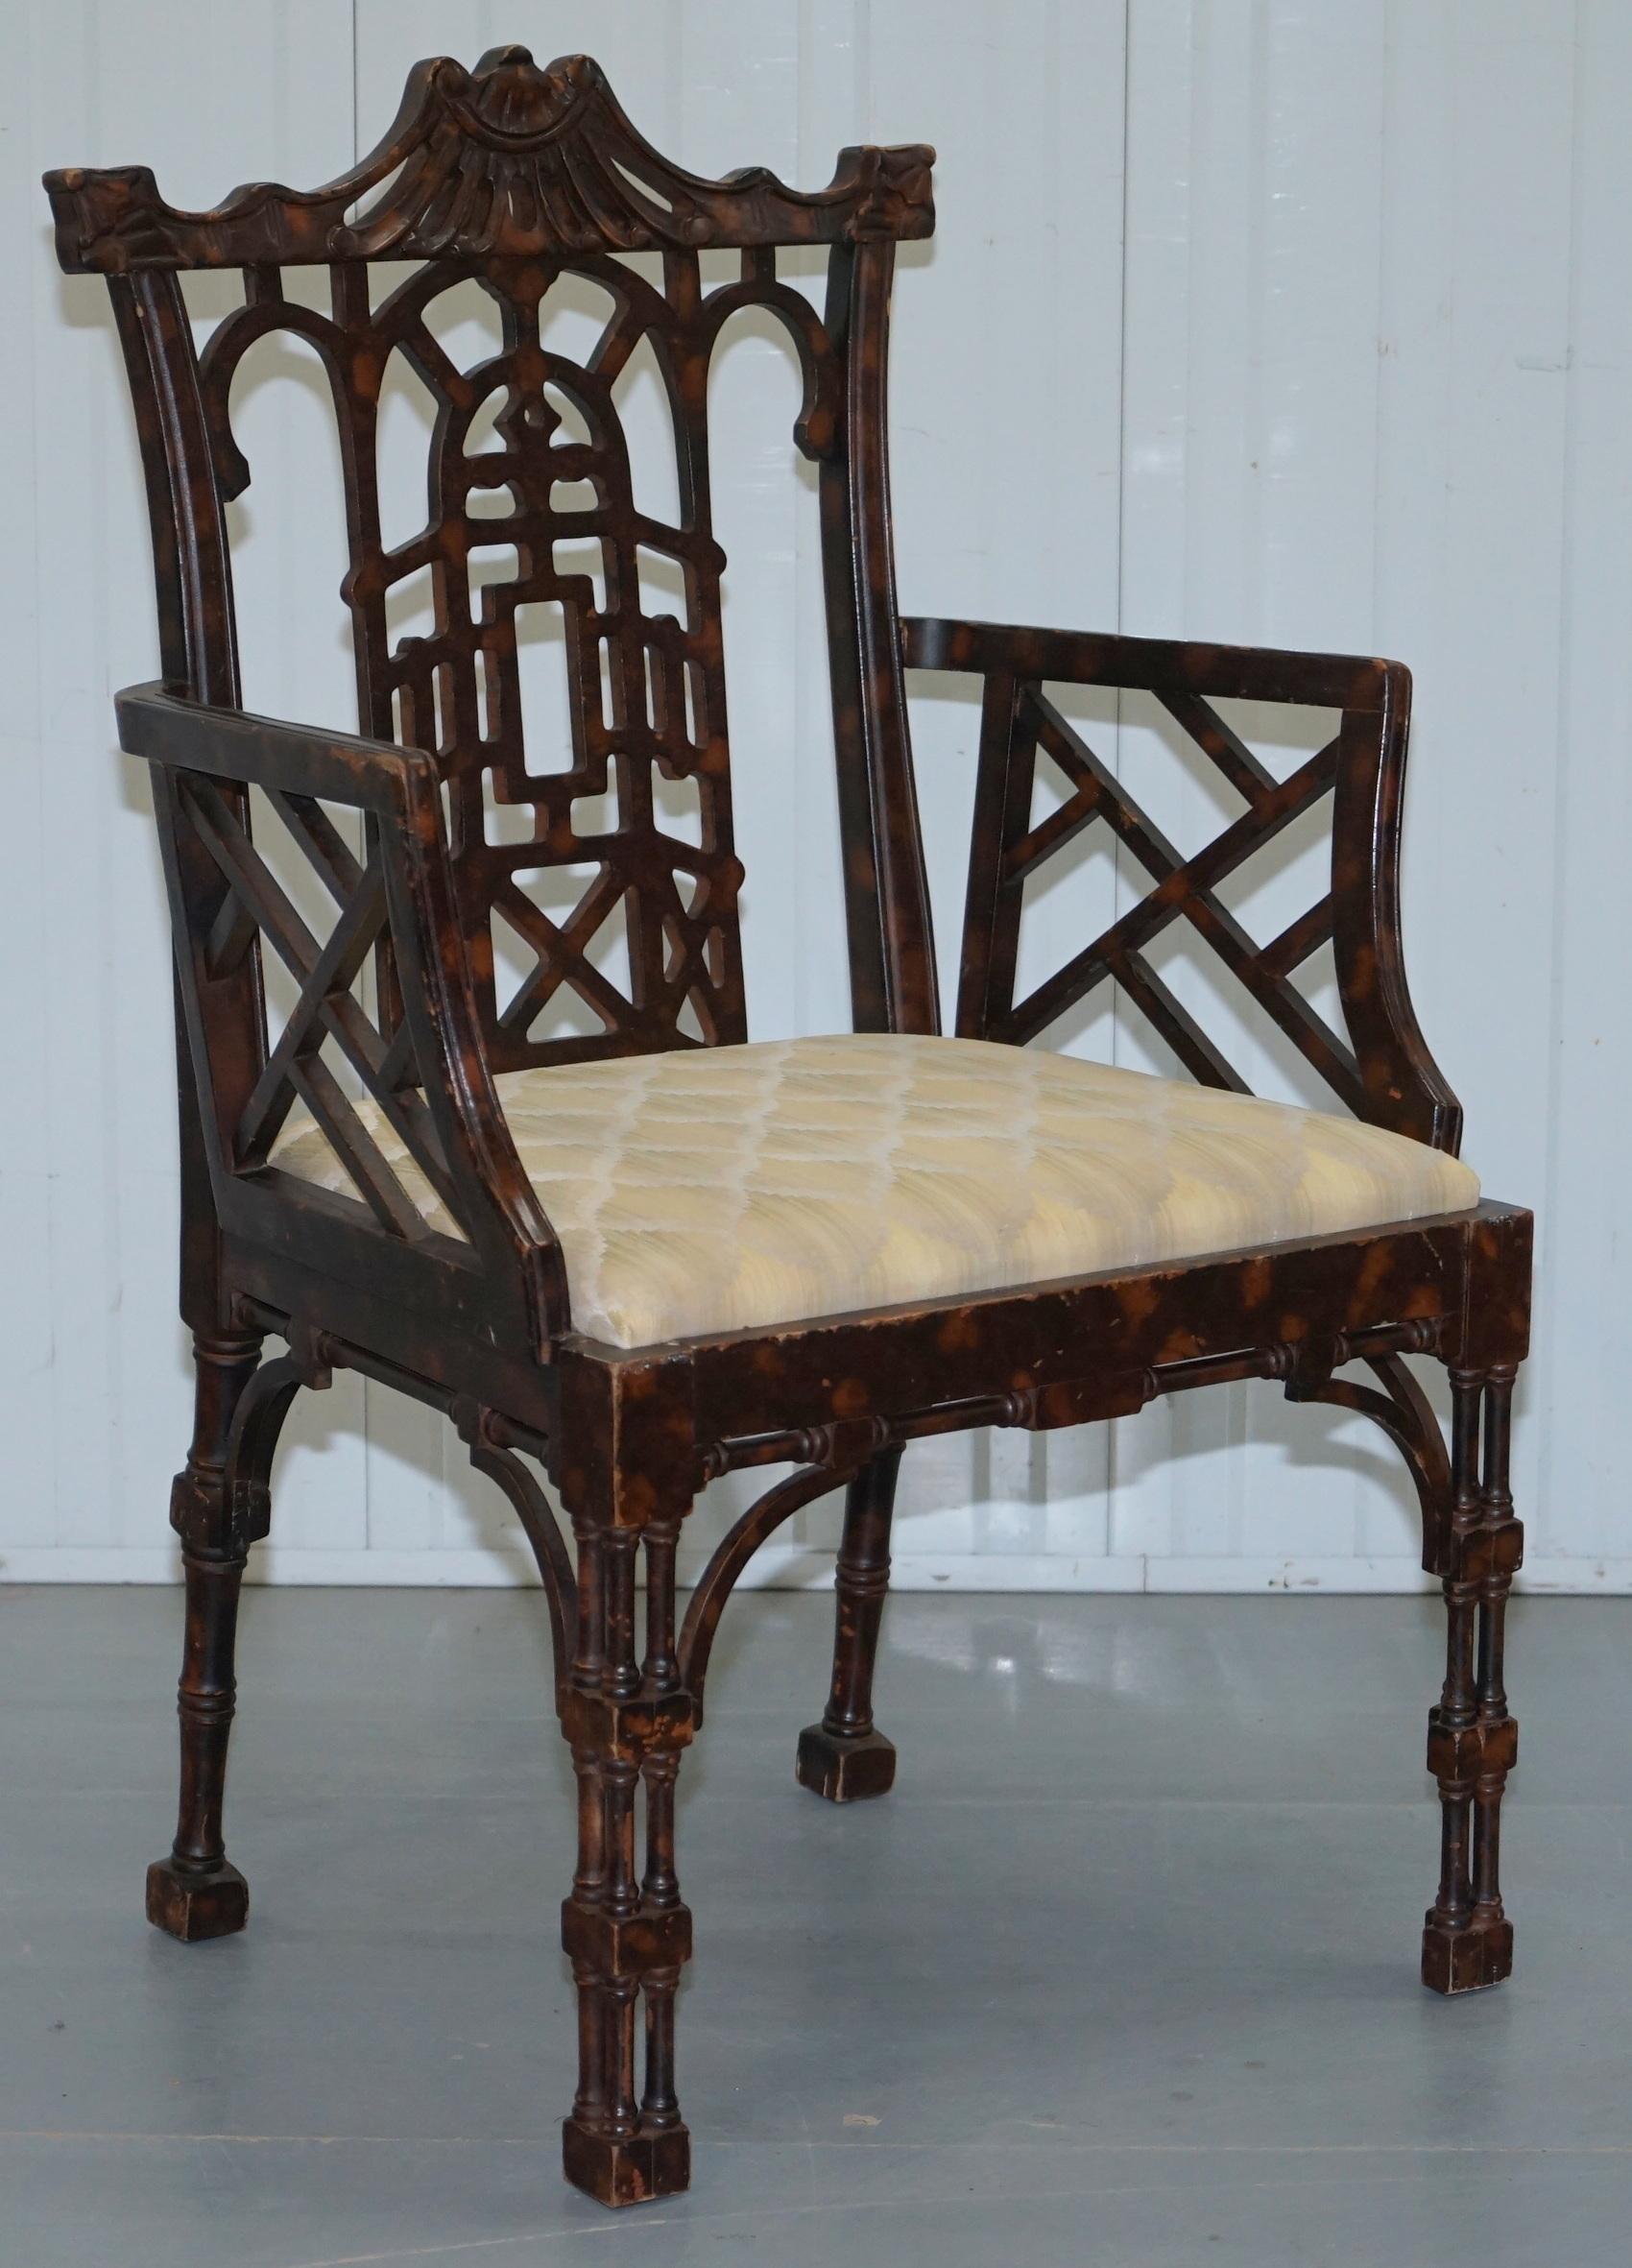 We are delighted to offer for sale this stunning and very rare pair of Chinese Chippendale tortoiseshell carver armchairs

A beautiful, desirable and unique pair, the distressed tortoiseshell finish is unique to this pair of chairs, the design is